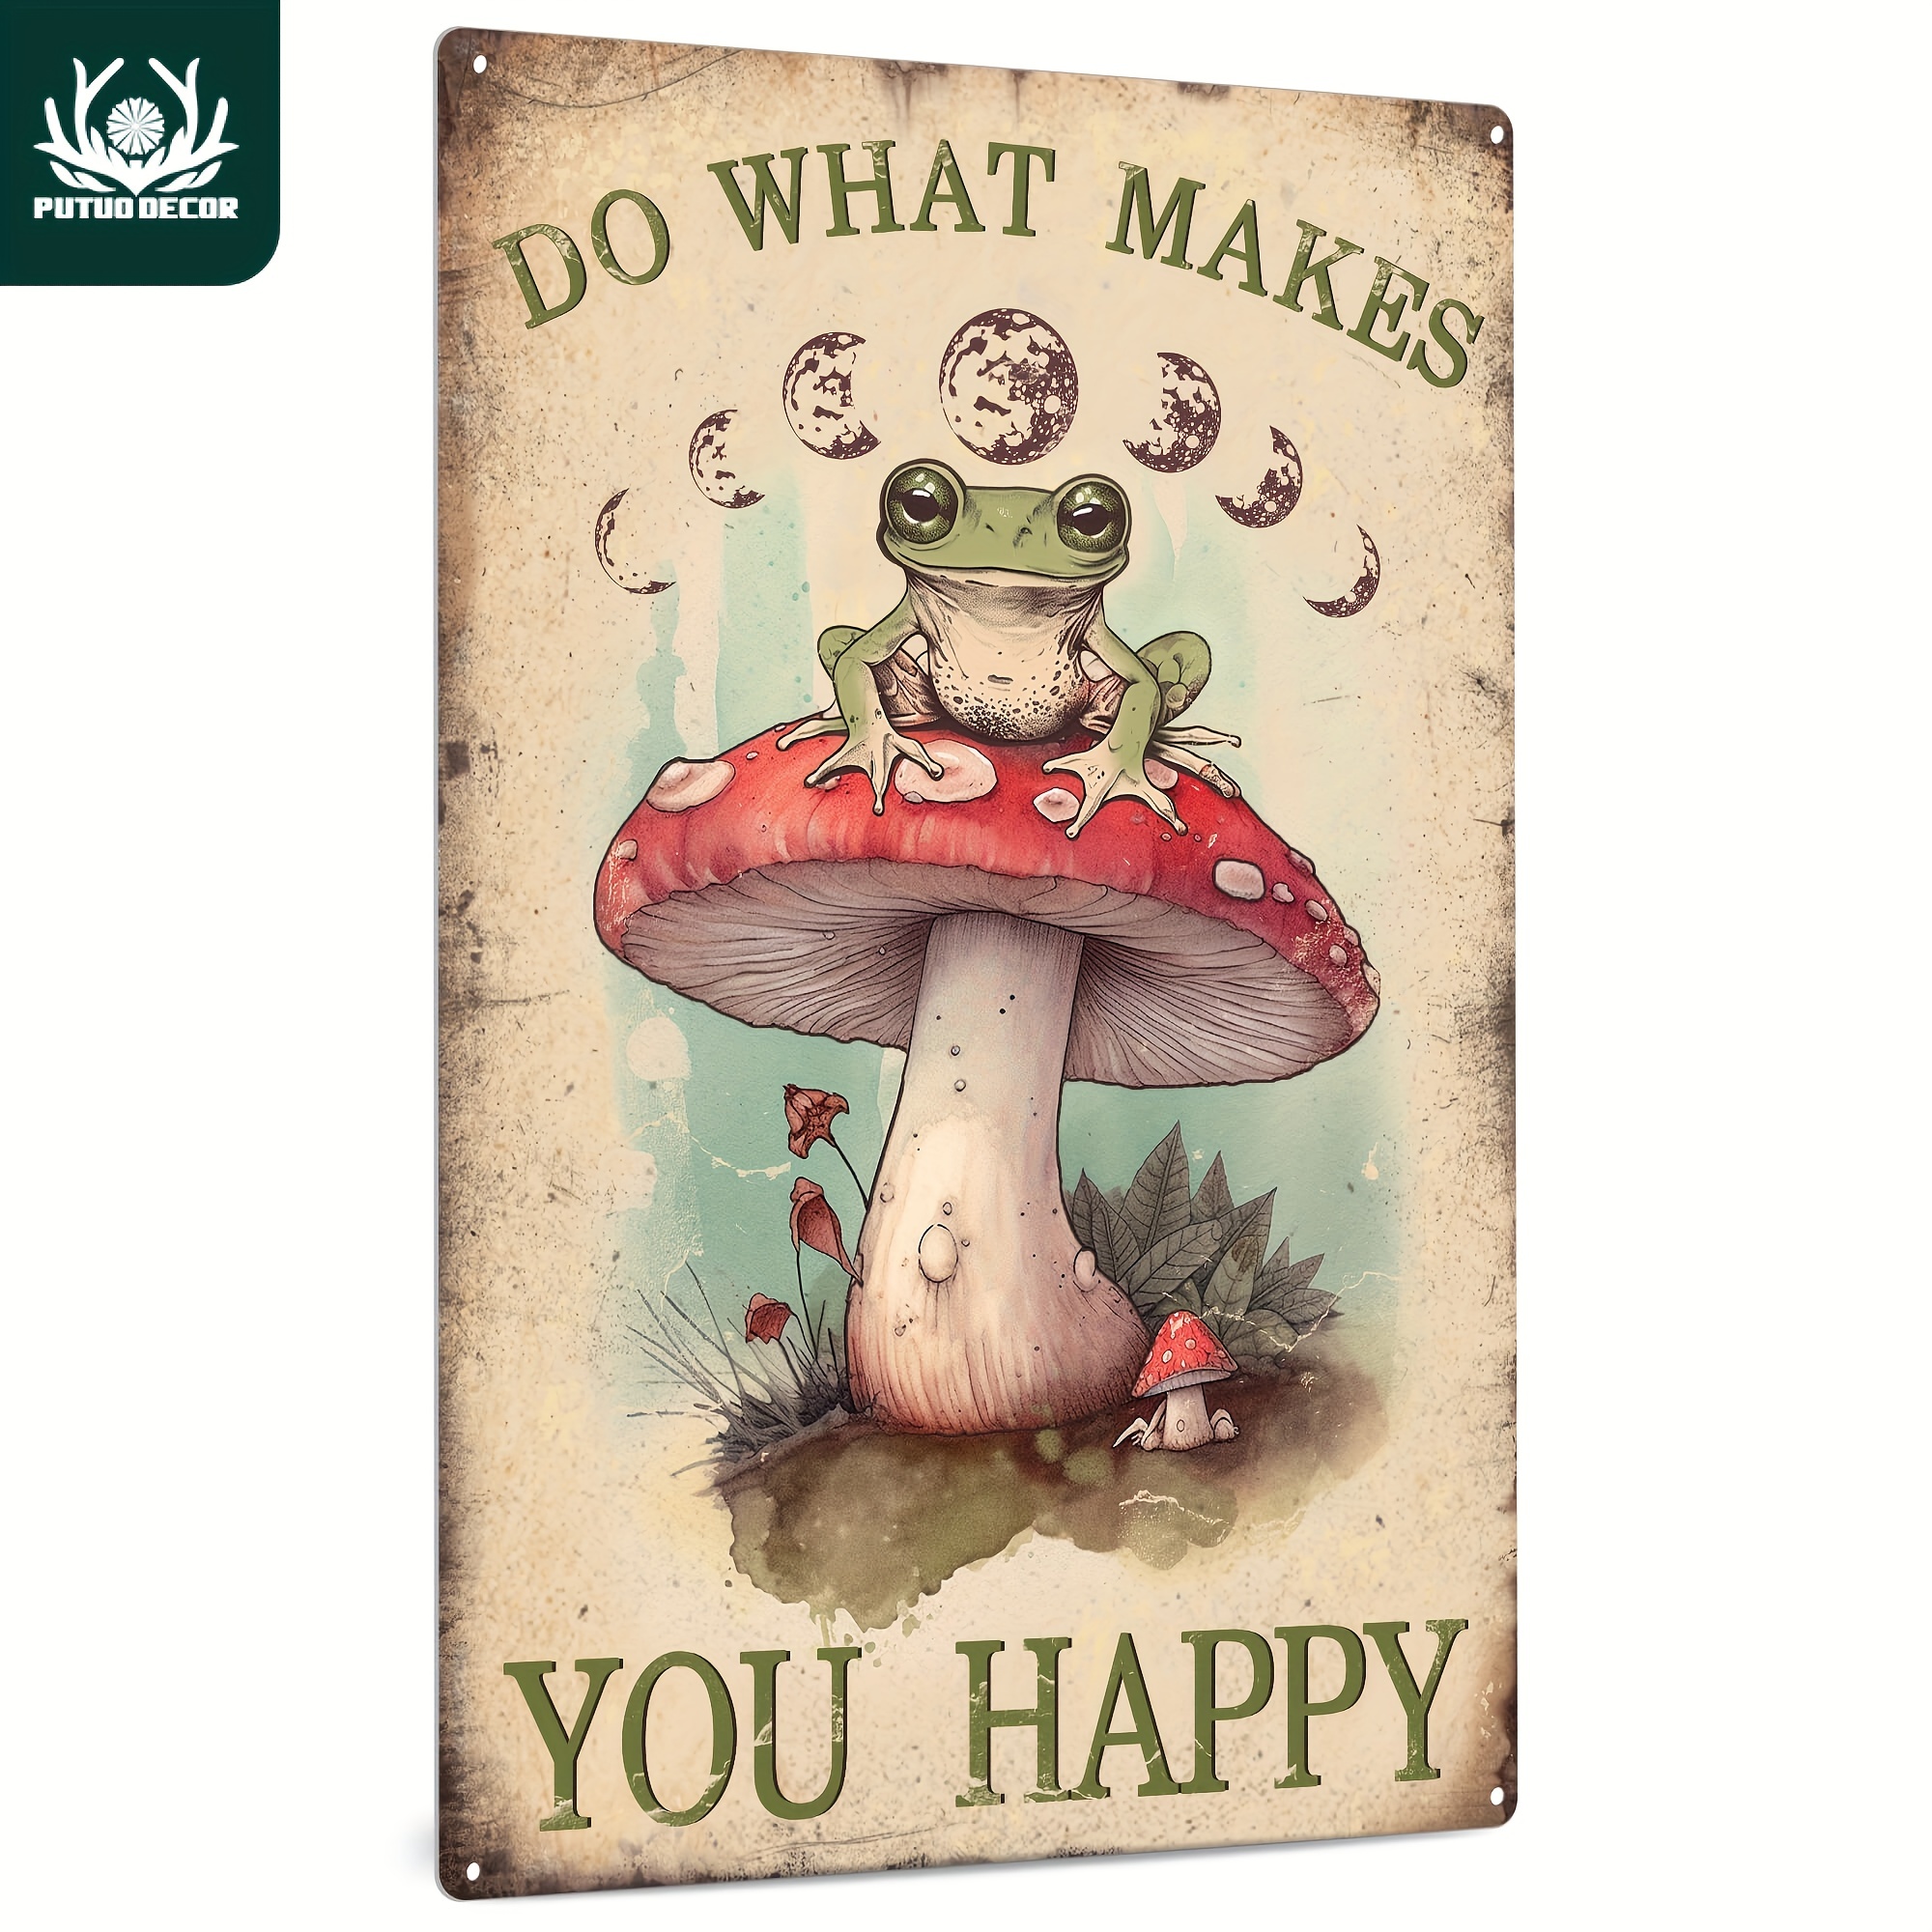 

1pc, Do What Makes You Happy Vintage Metal Tin Sign - Inspirational Wall Art For Home, Restaurant, Bar, Cafe, Garage Decor - Water-proof And Dust-proof